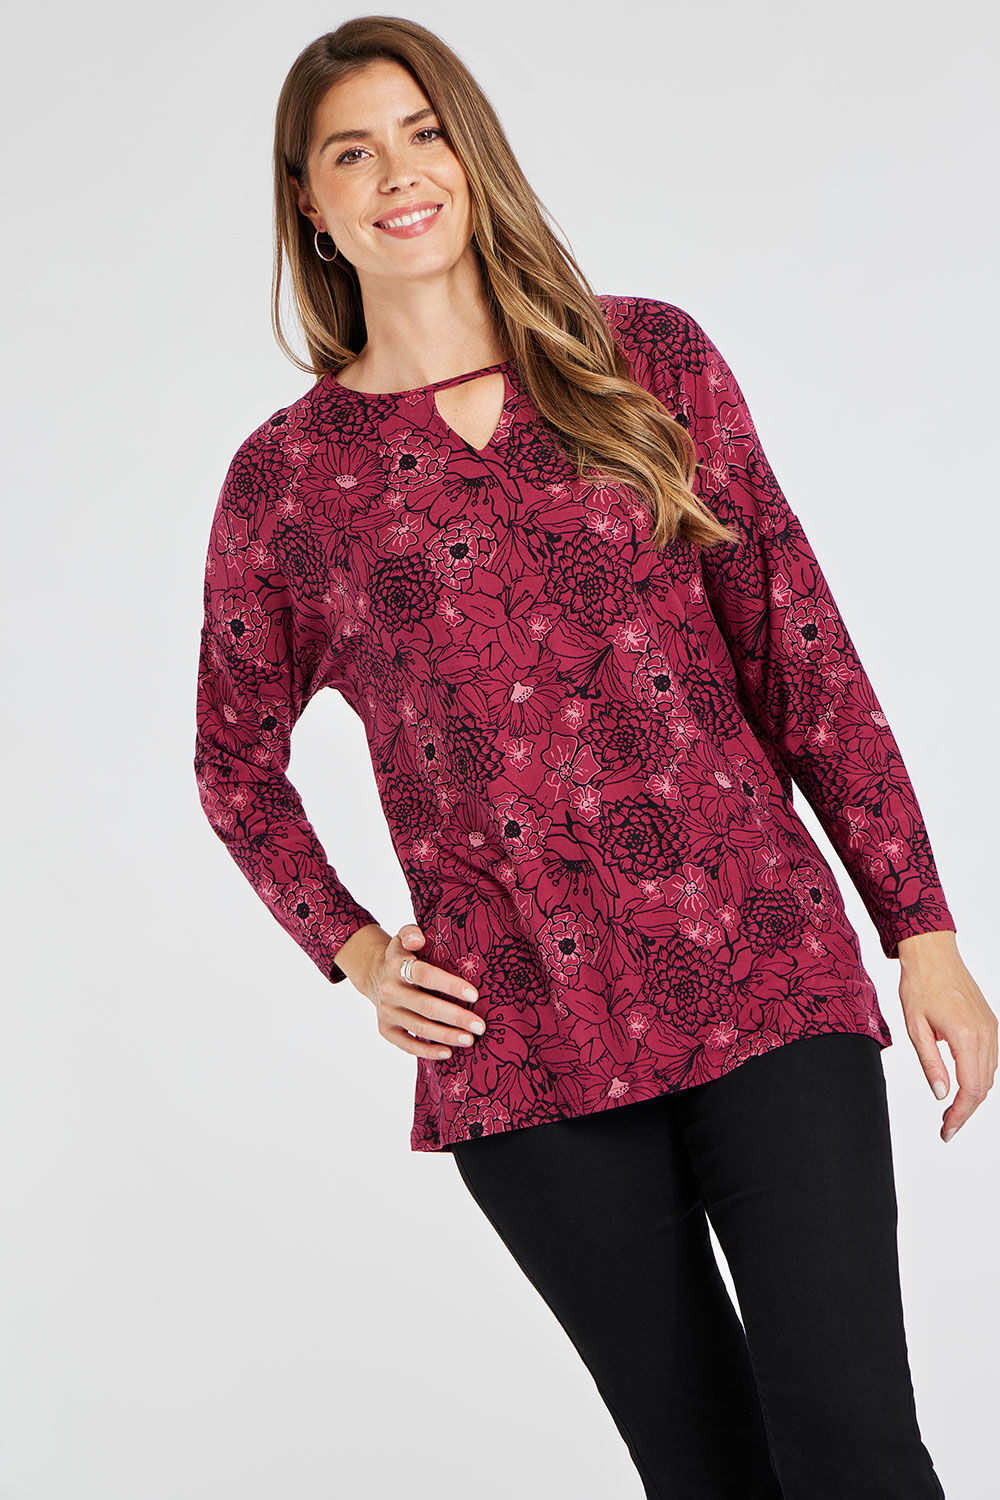 Bonmarche Burgundy Long Sleeve Floral Print Soft Touch Tunic, Size: 12